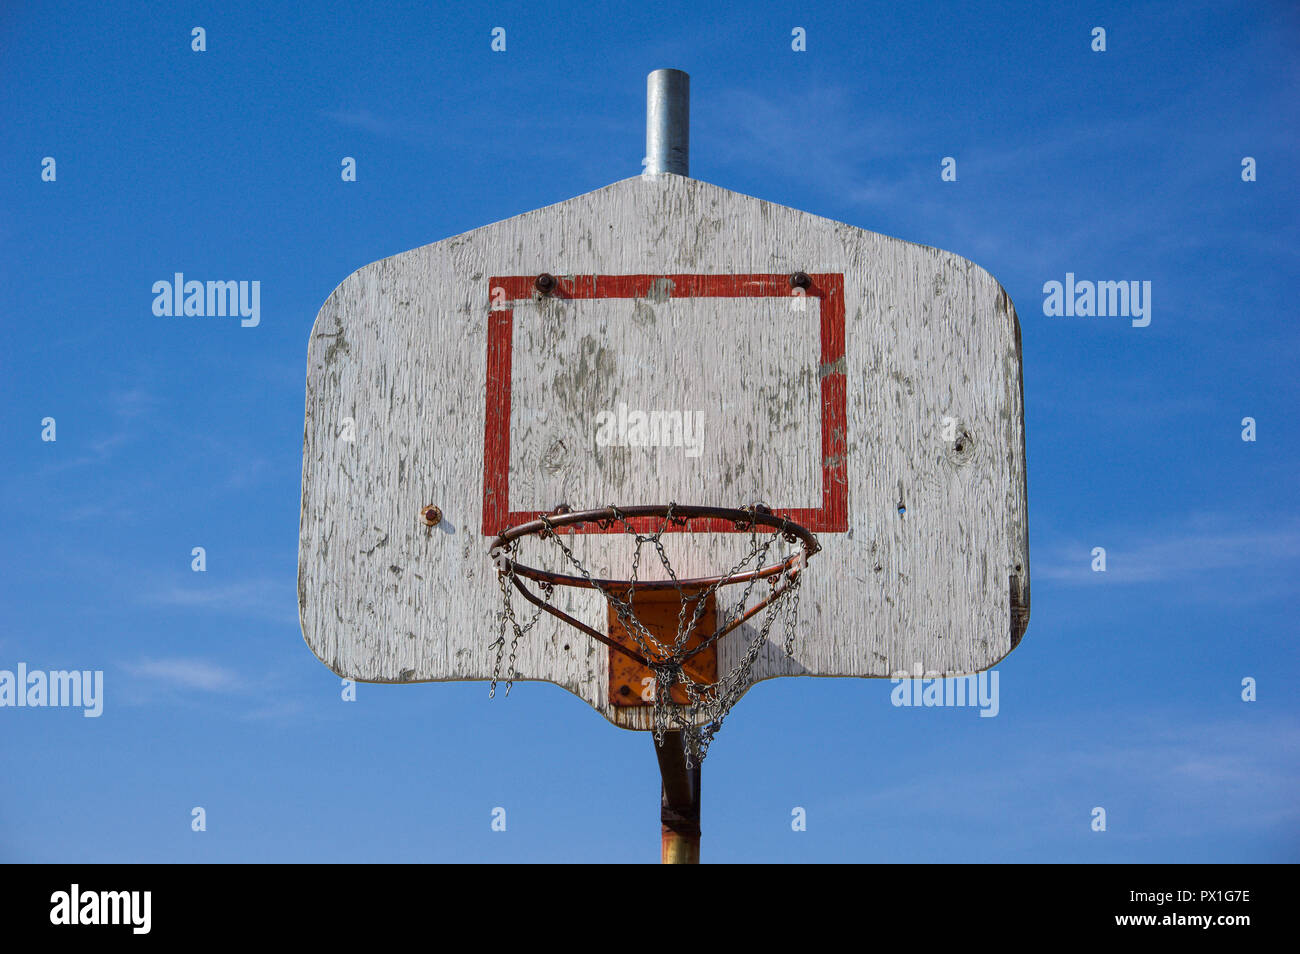 Close up of an outdoors old wooden backboard of a metal basketball hoop  with broken metal chain basket. Blue sky in the background Stock Photo -  Alamy